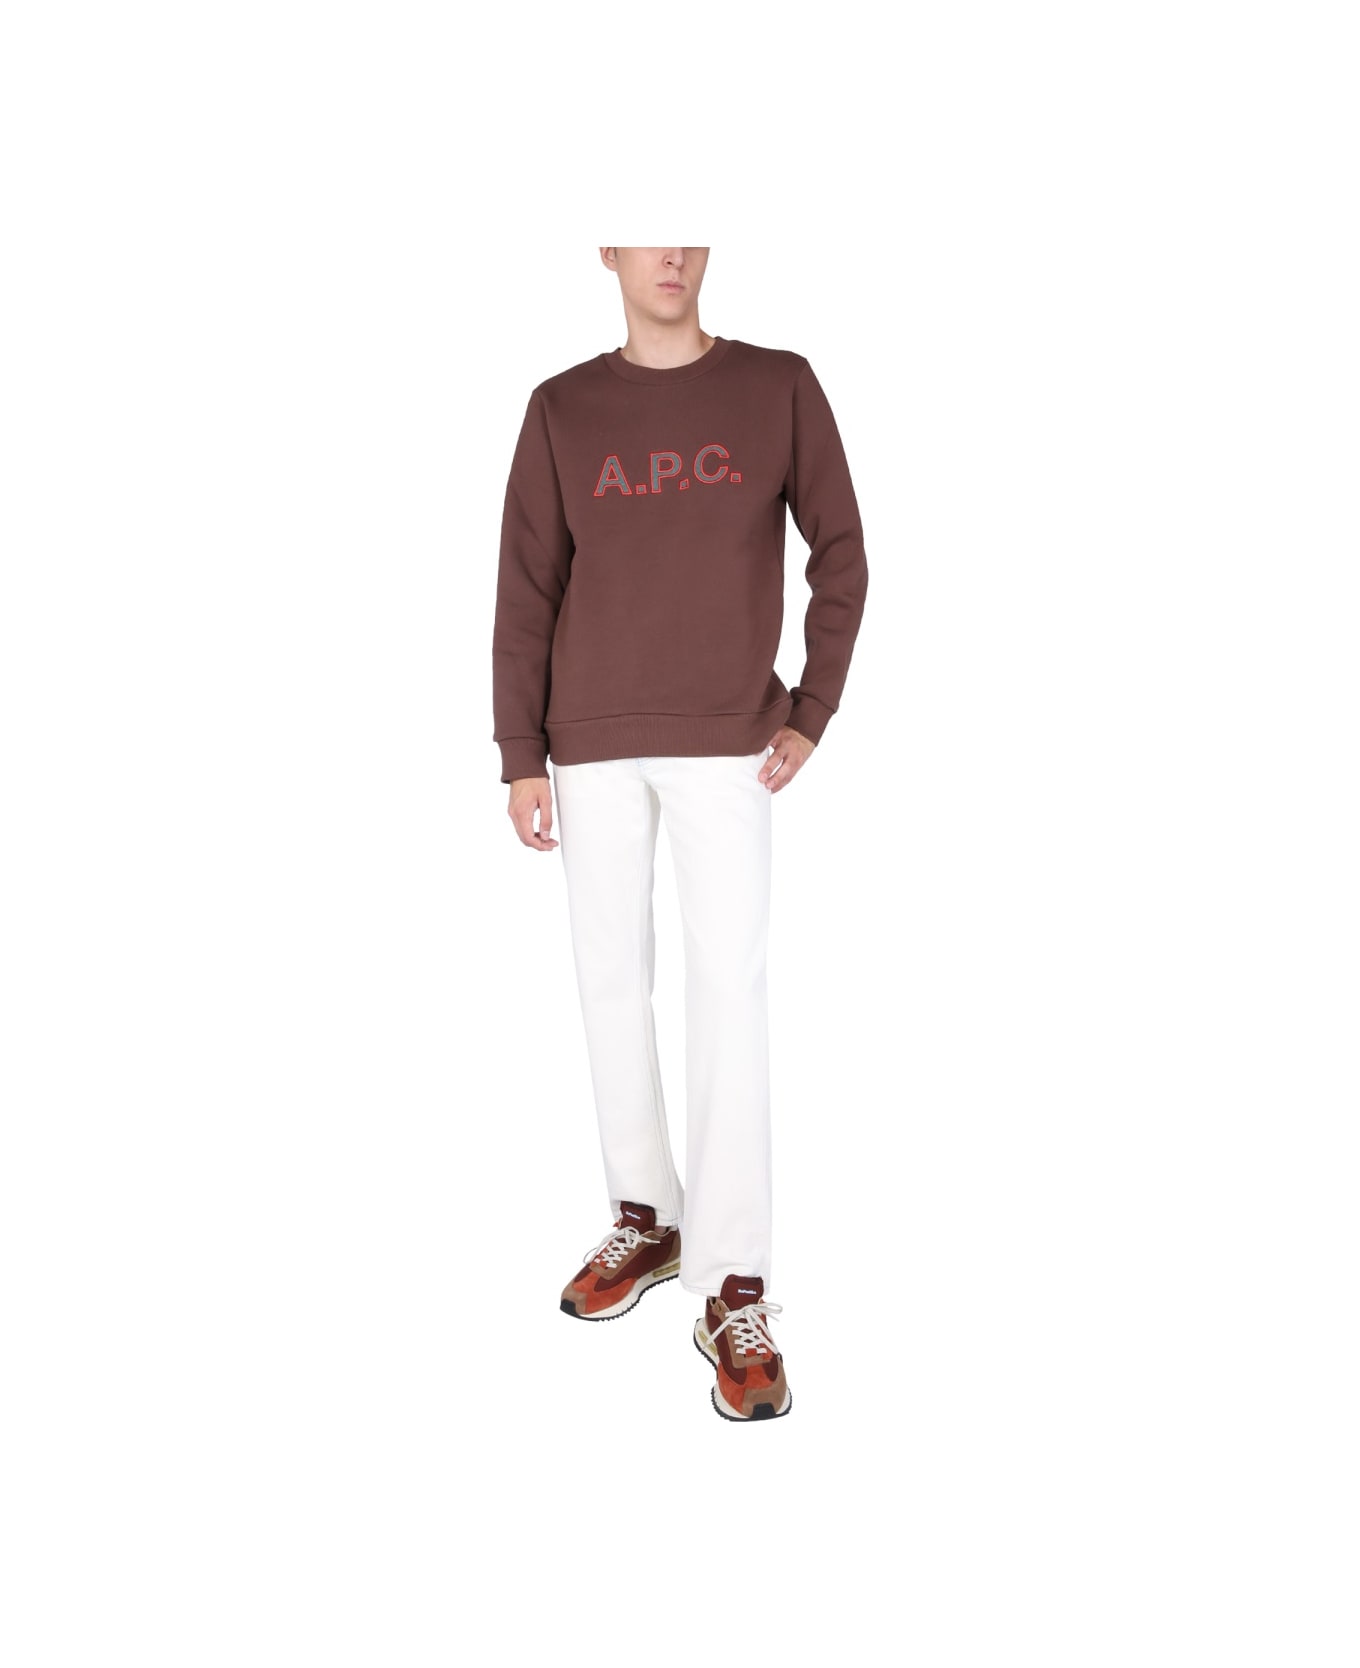 A.P.C. Sweatshirt With Embroidered Logo - BROWN フリース